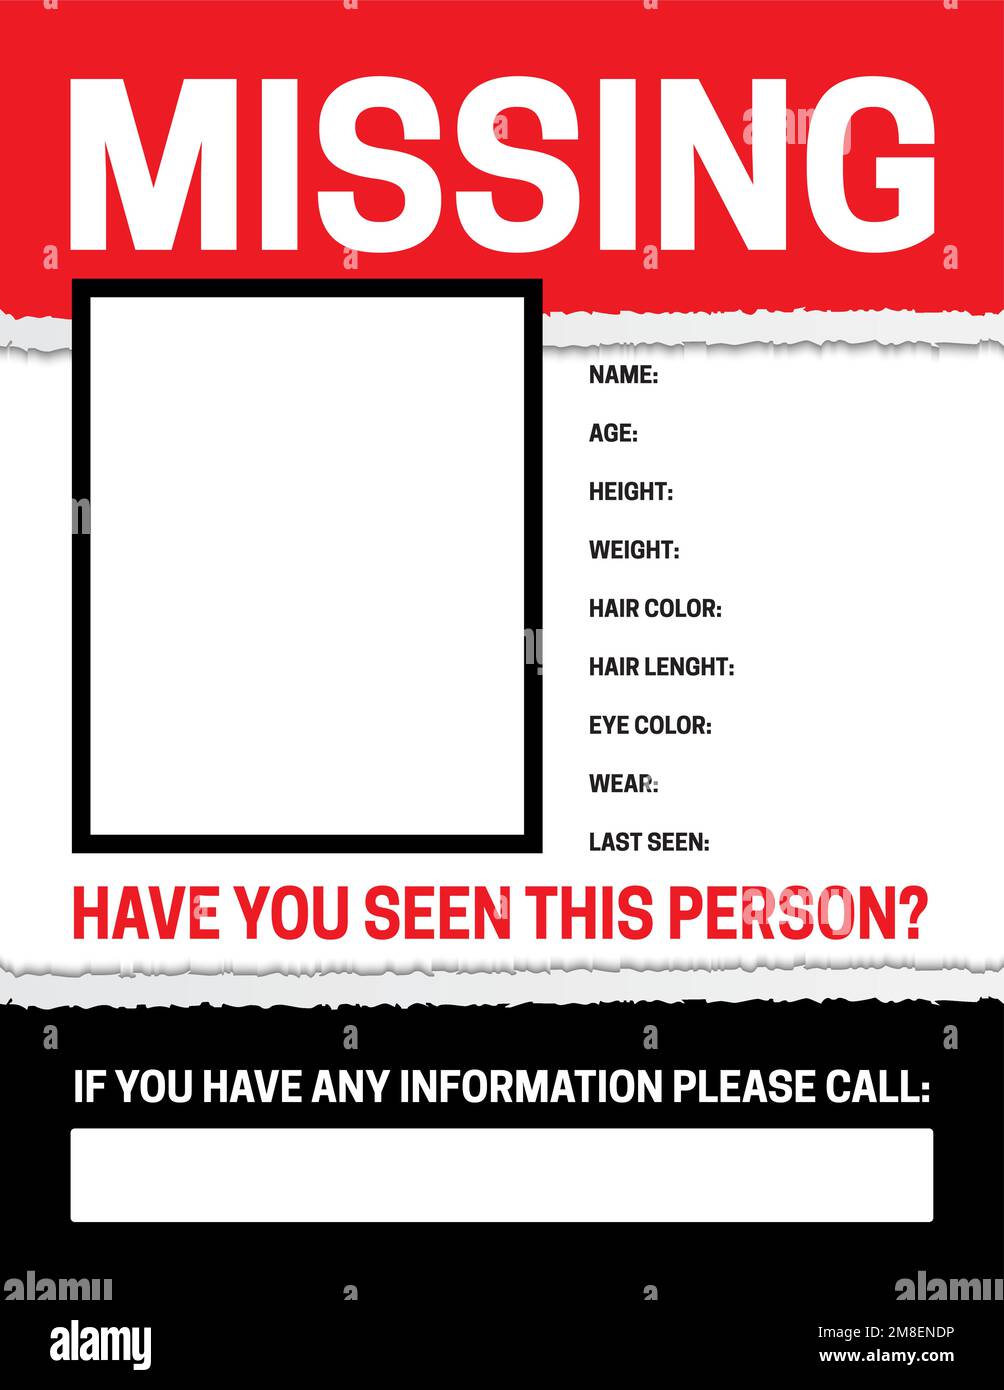 Missing Person Poster Template Stock Vector